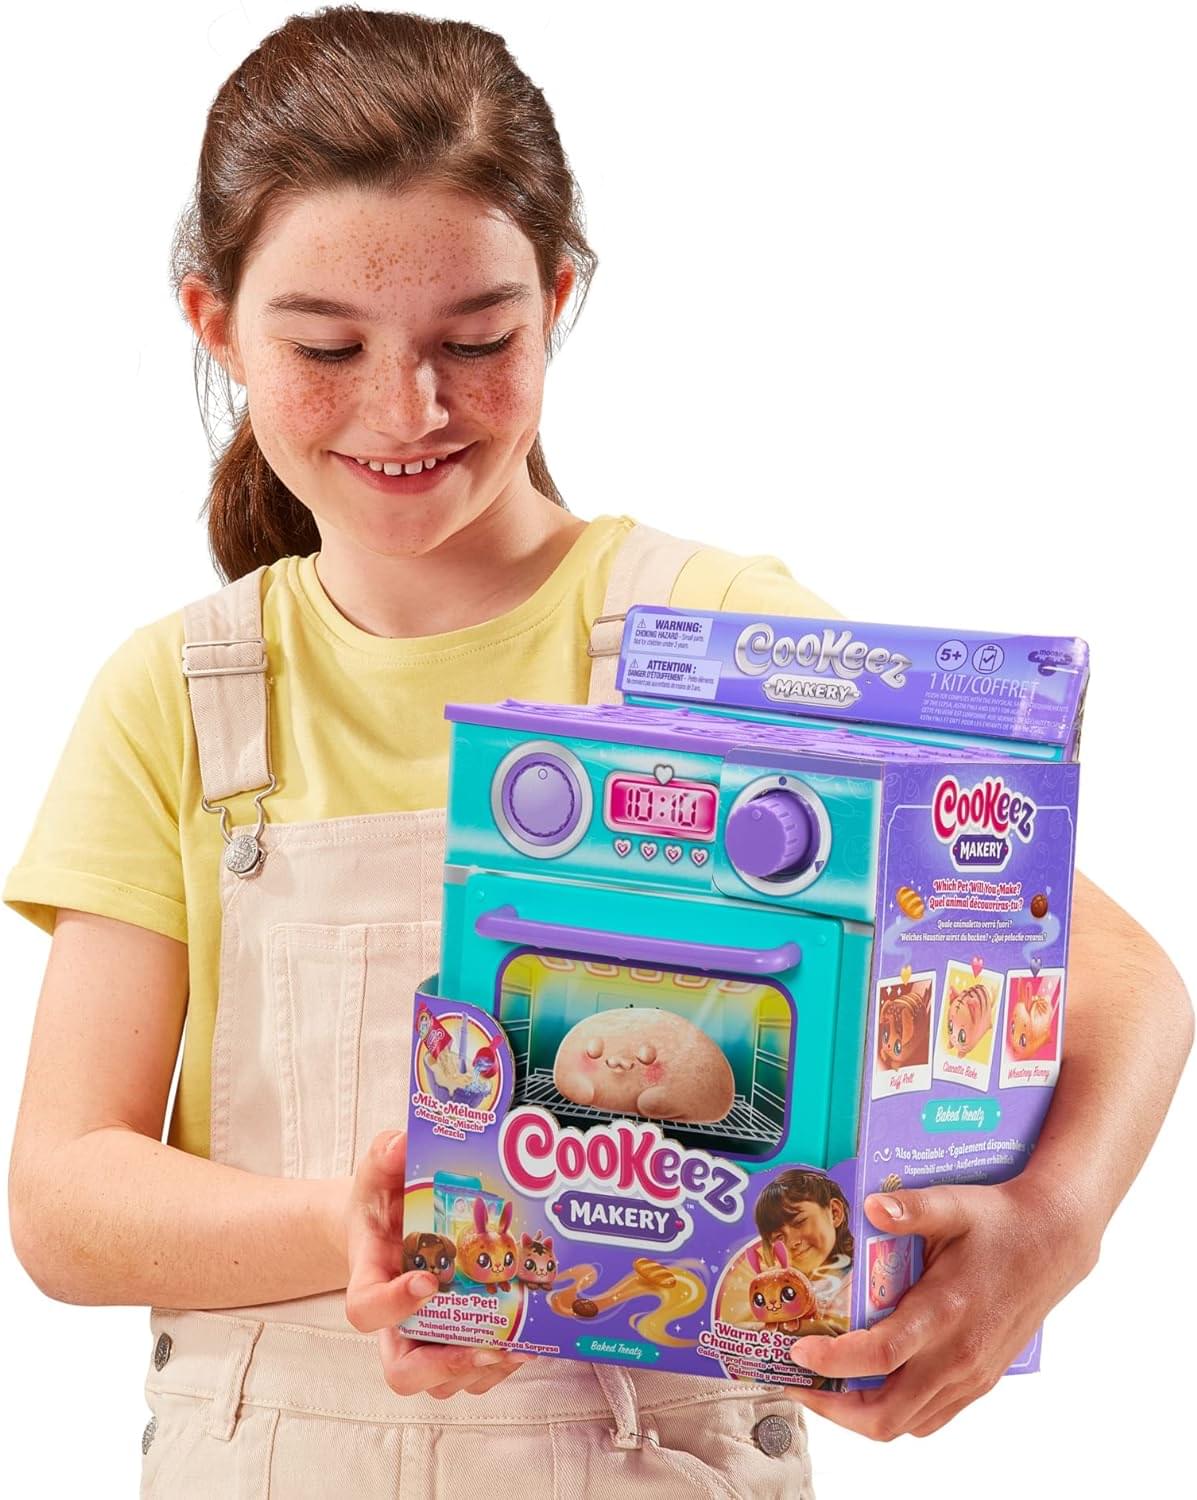 Buy Moose Toys Cookeez Makery Playset Bake a Plush from £34.99